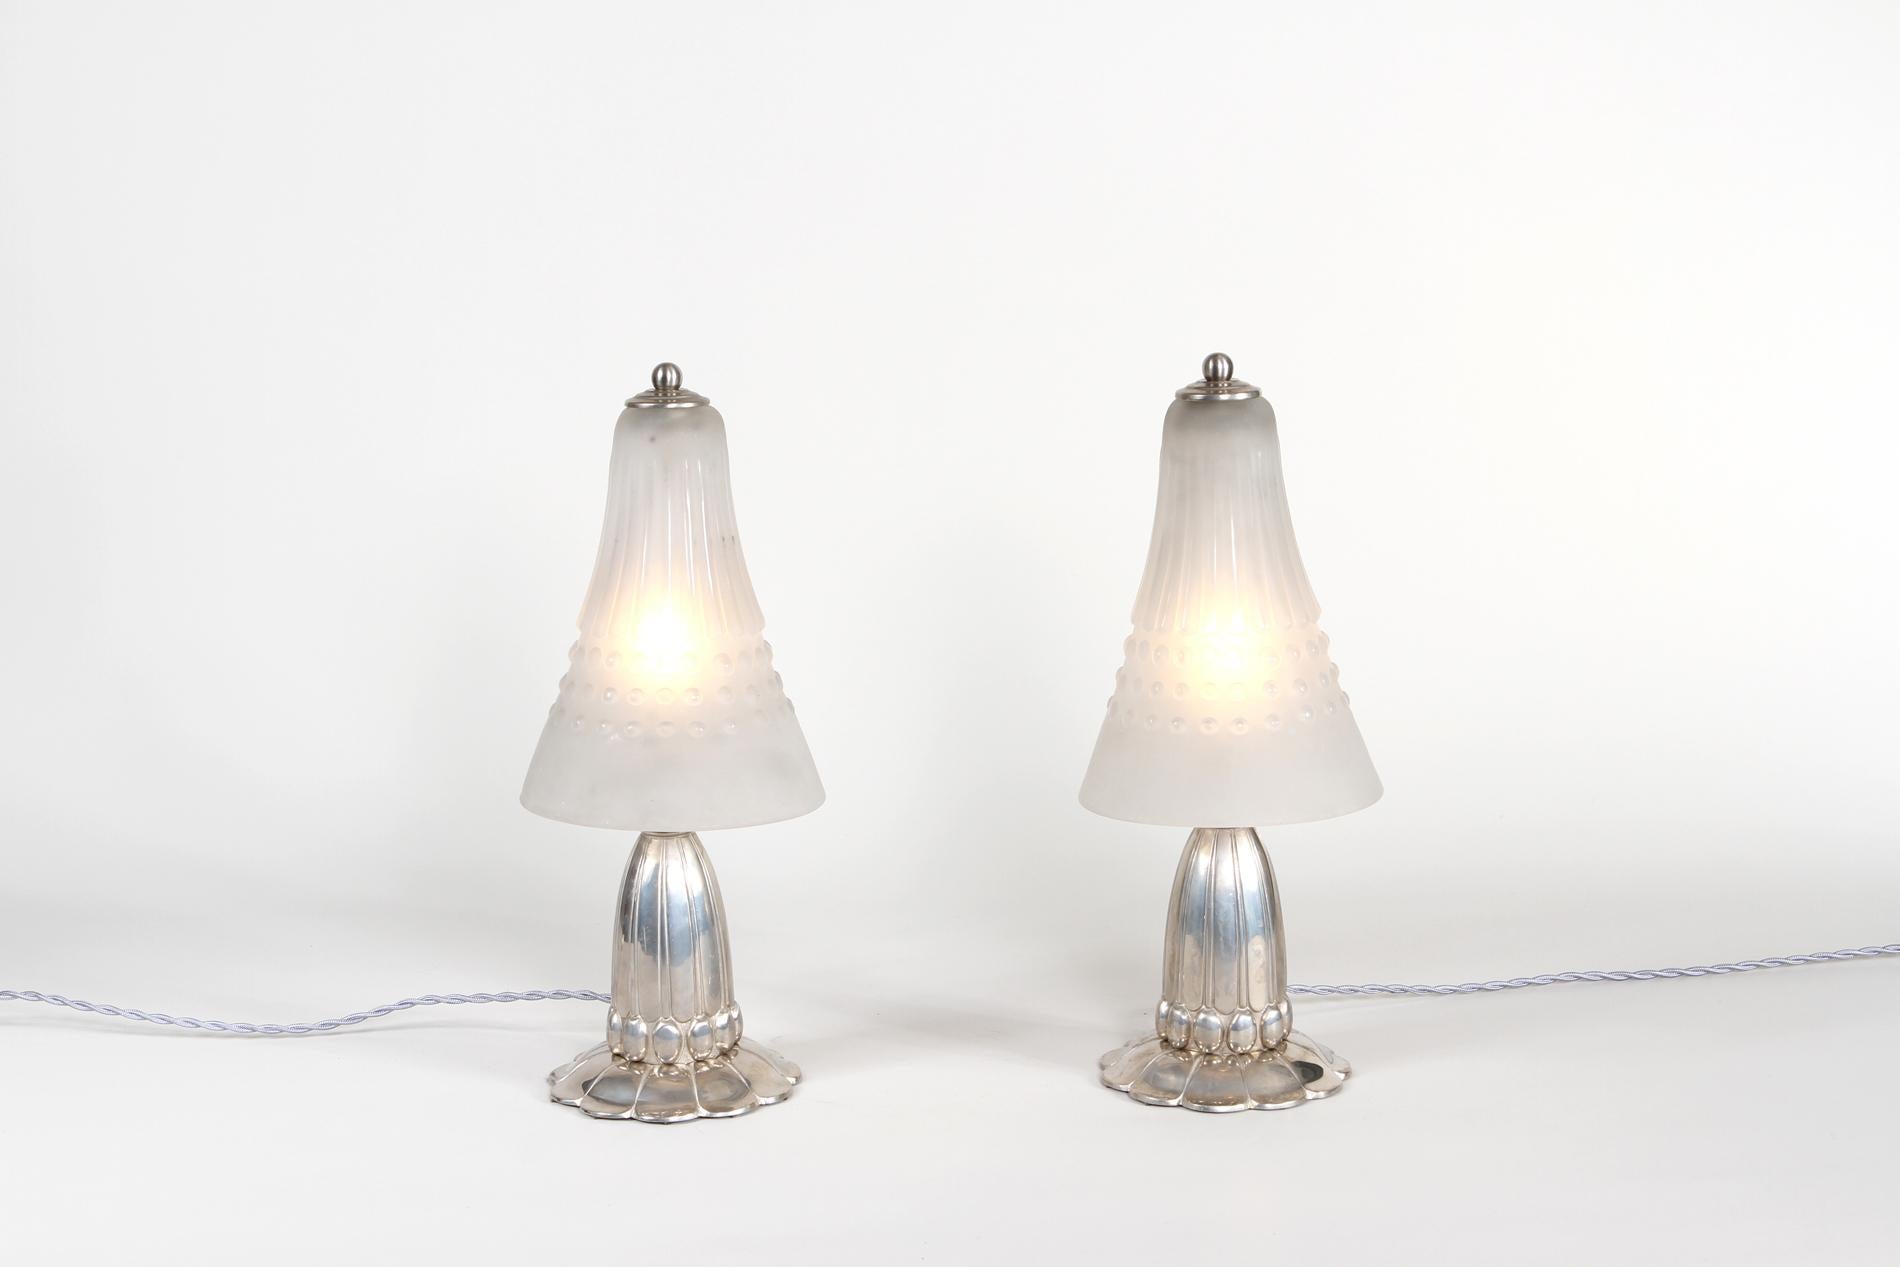 Pair of original French Art deco table lamps circa 1930 by Paul Follot and frères Muller. The base is in silvered bronze made by Follot and the glass is typical decor by Frères Muller. 